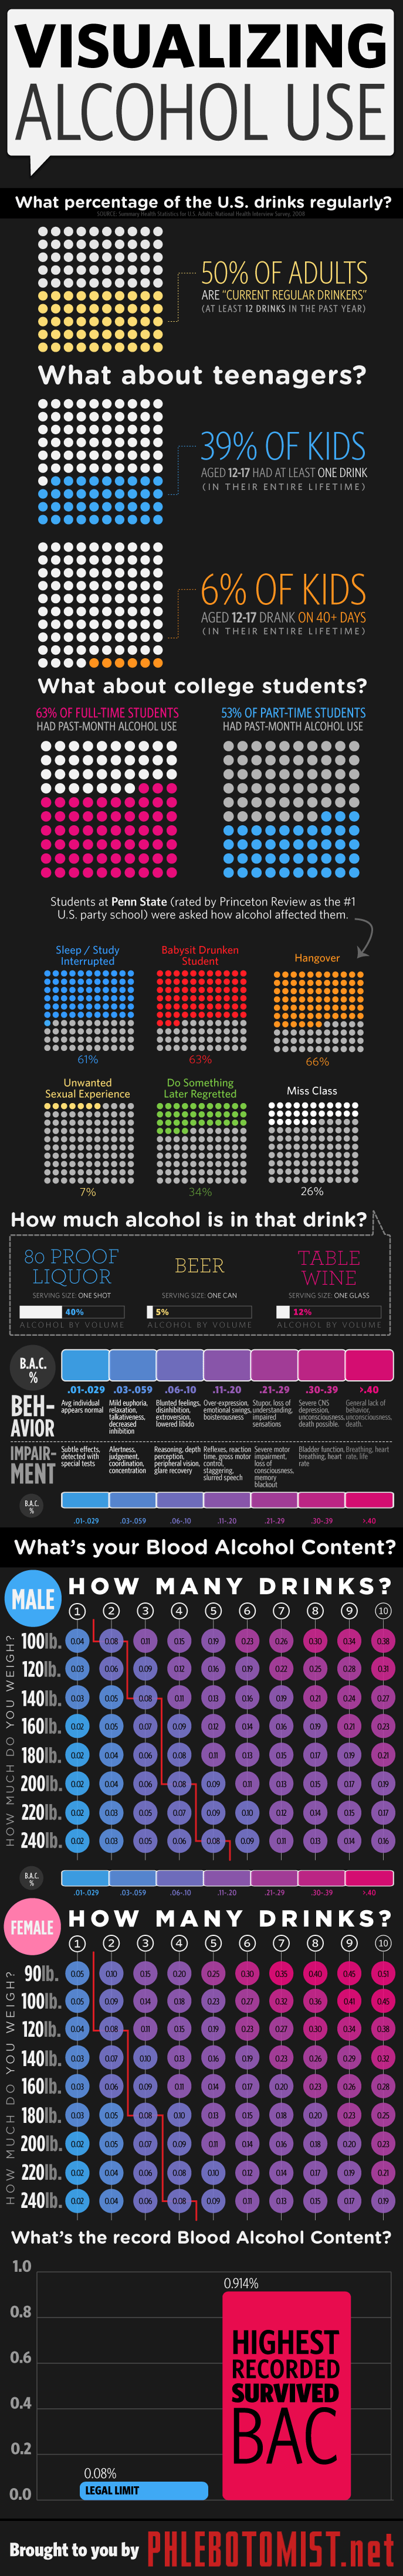 How Much Can You Drink? Blood Alcohol [infographic]